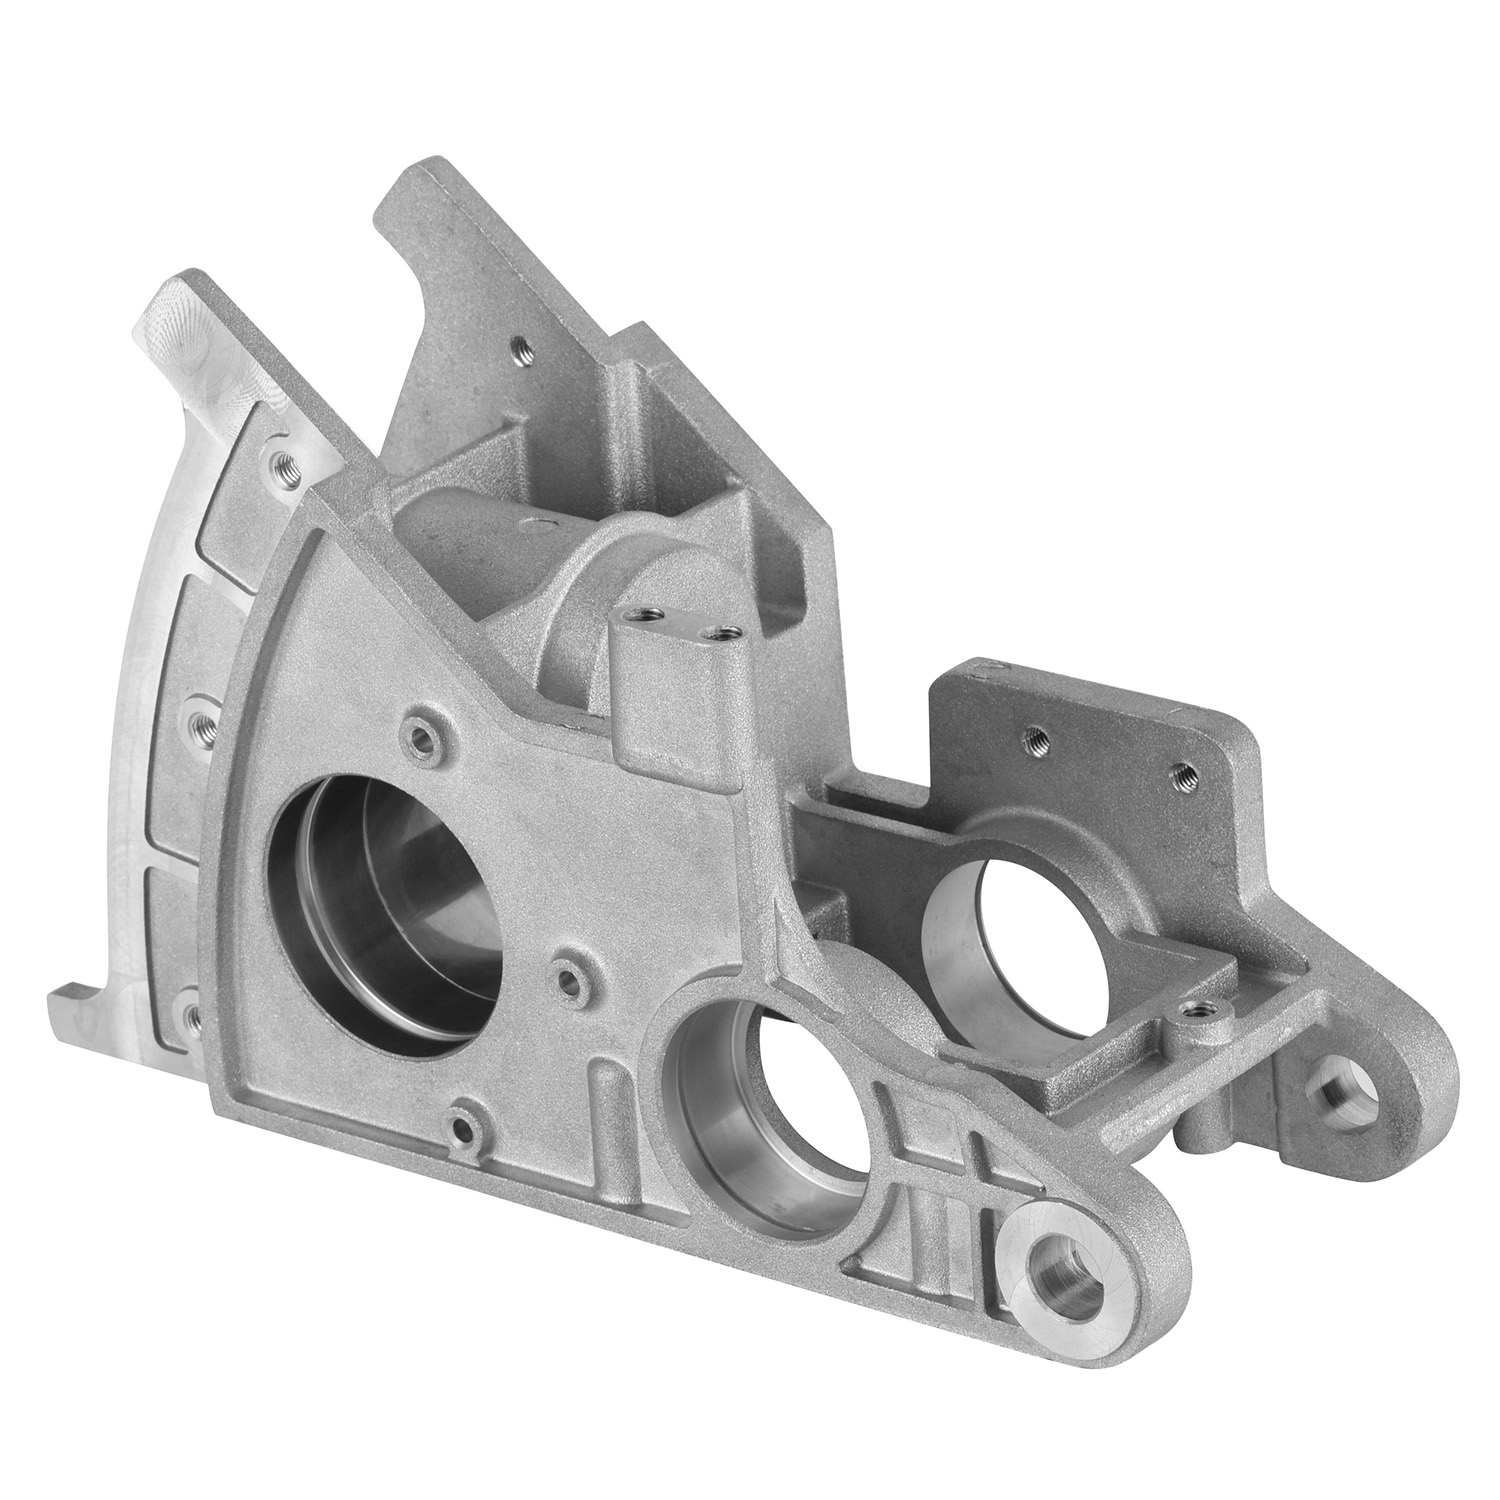 041.Aluminum Alloy Die Casting Knead and knock Case ADC12-2022-08-04